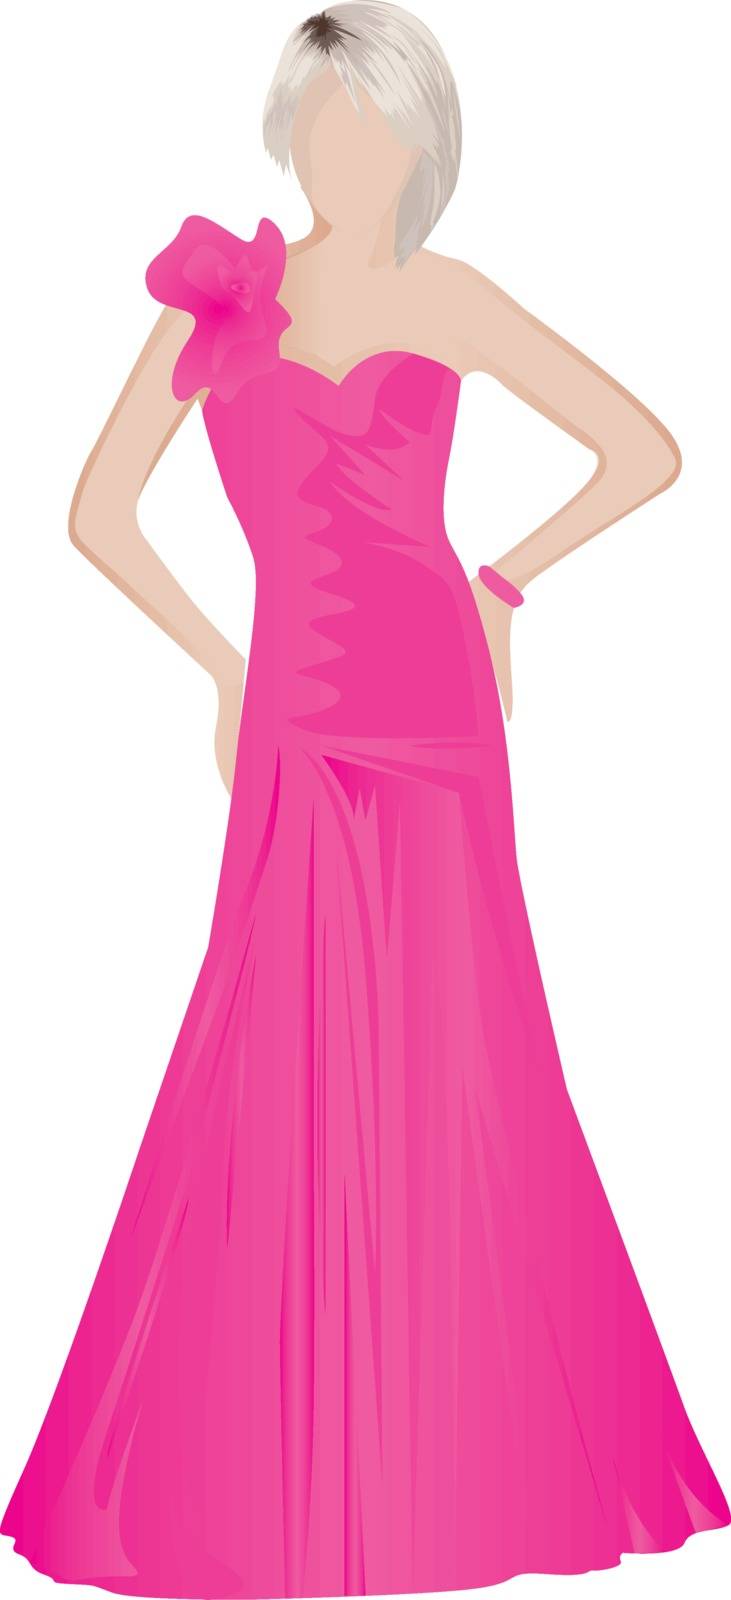 A girl in an evening dress vector illustration on a white background